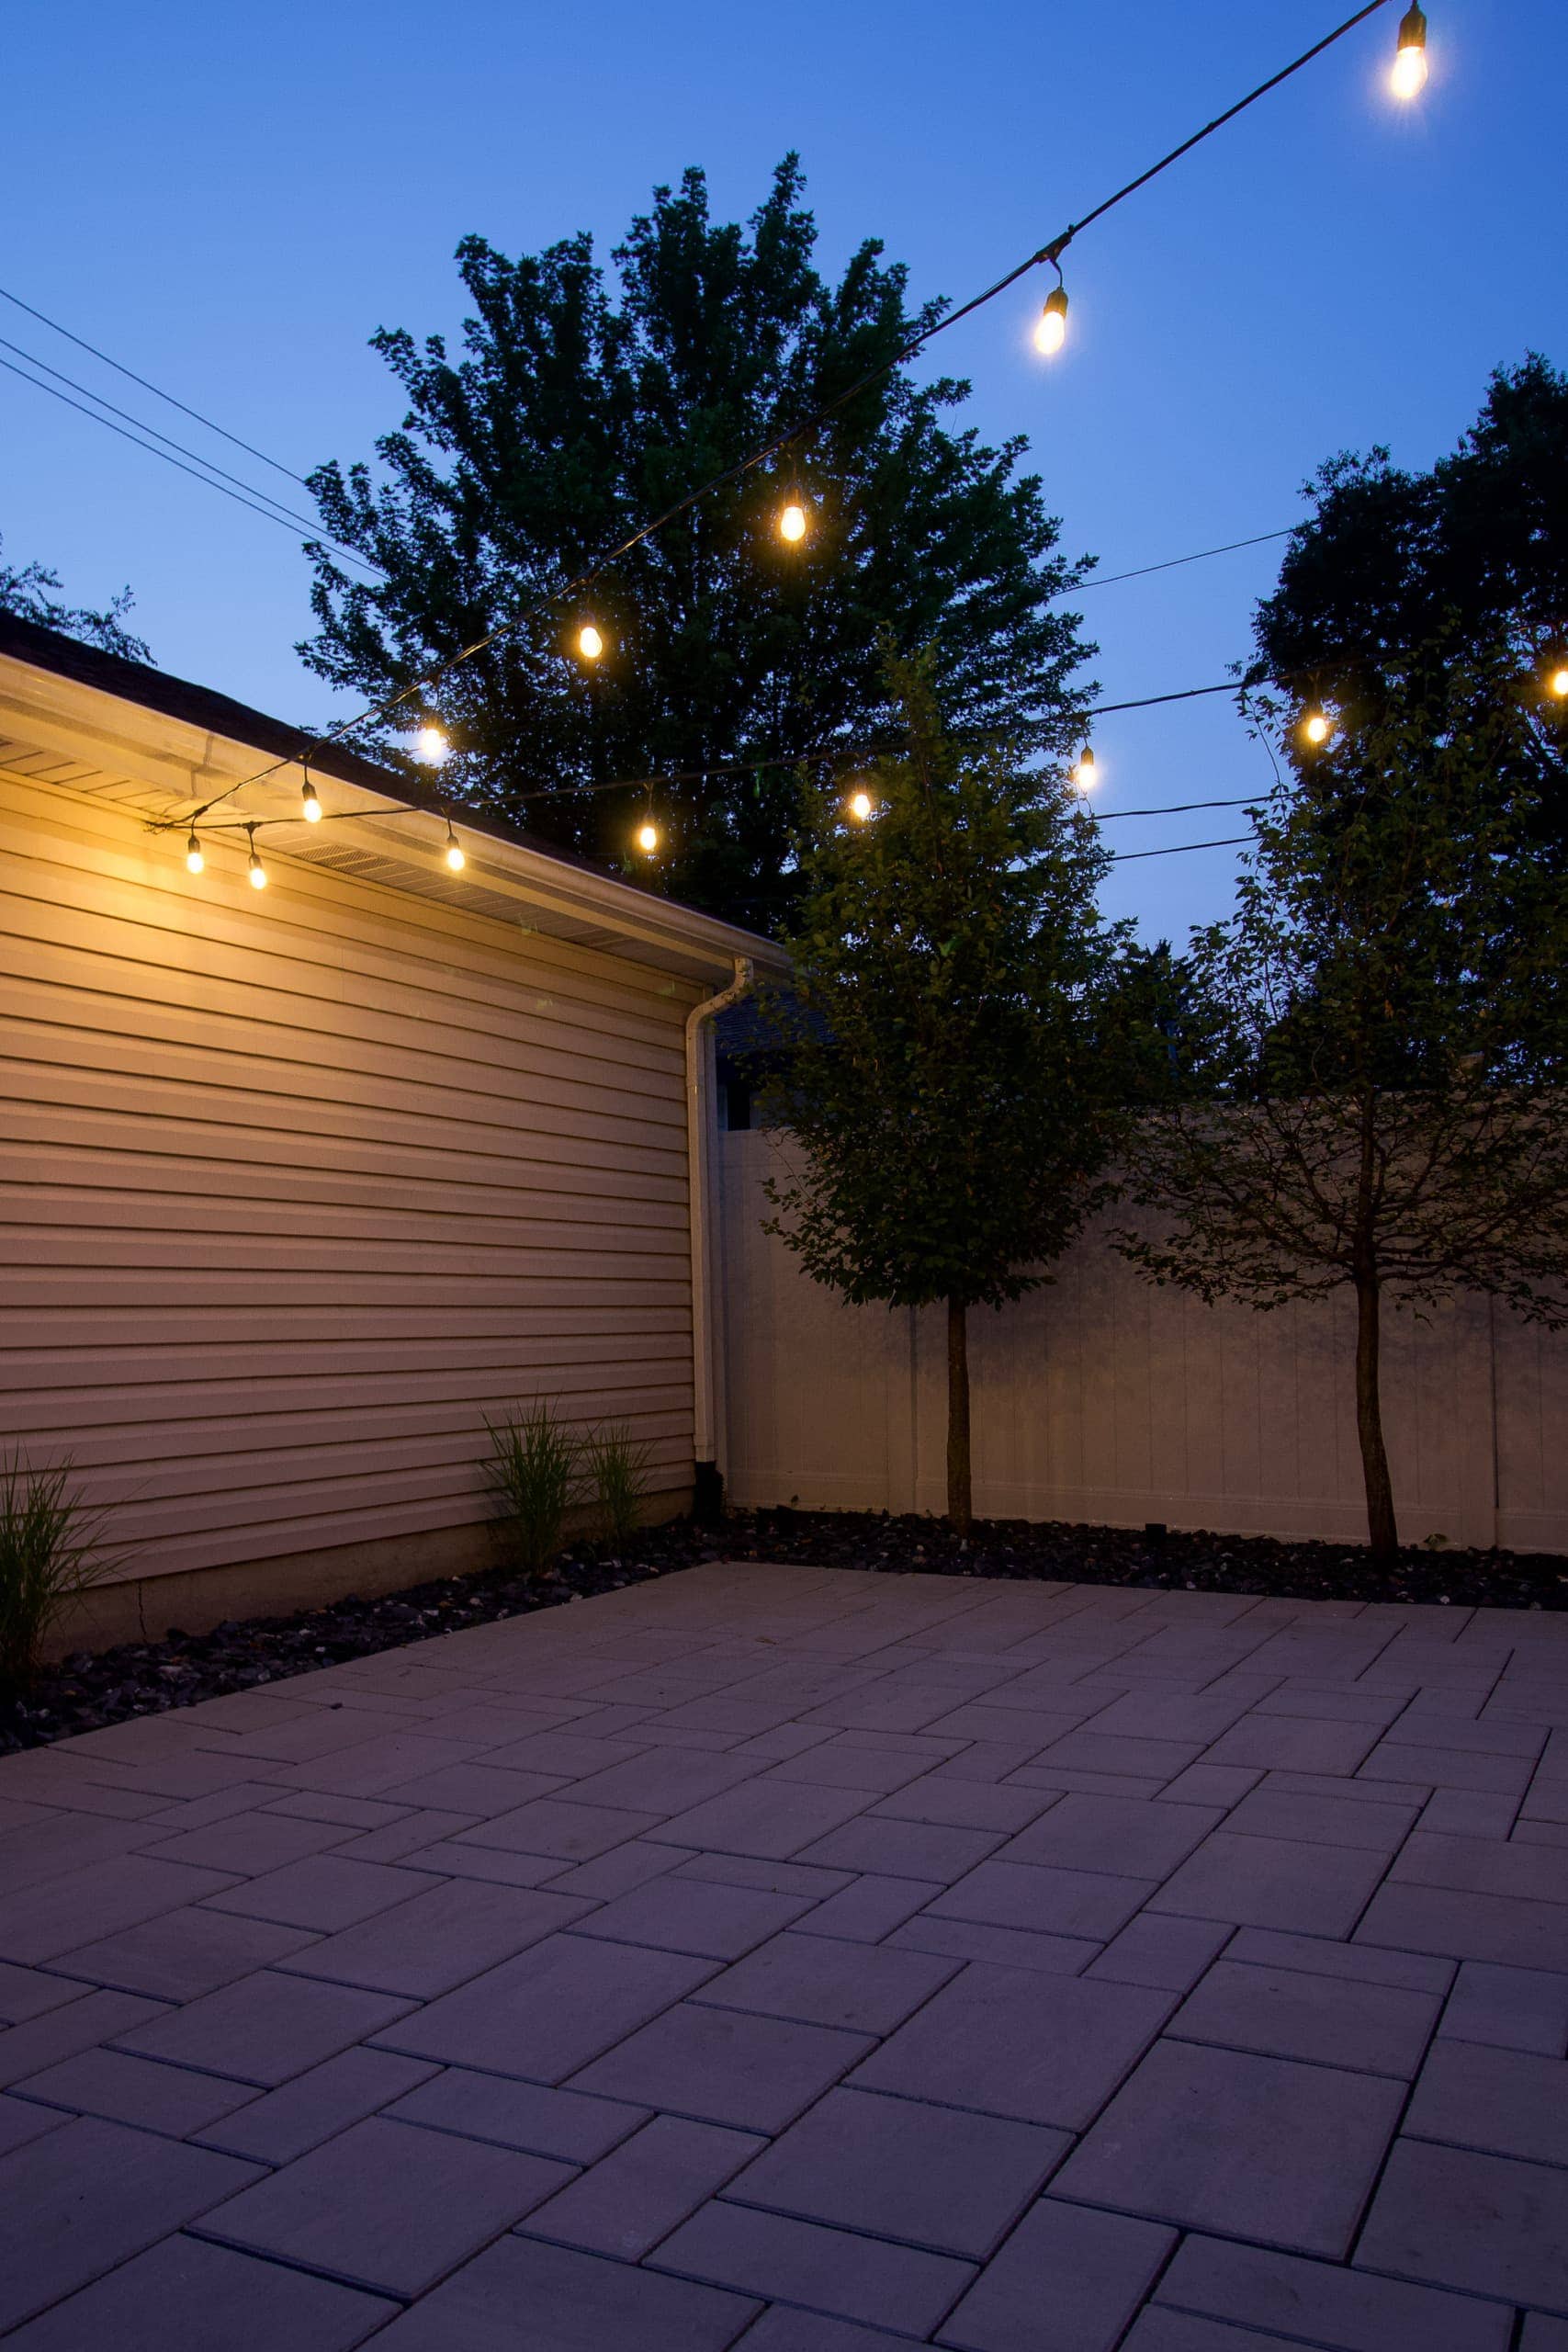 How to install string lights in your backyard